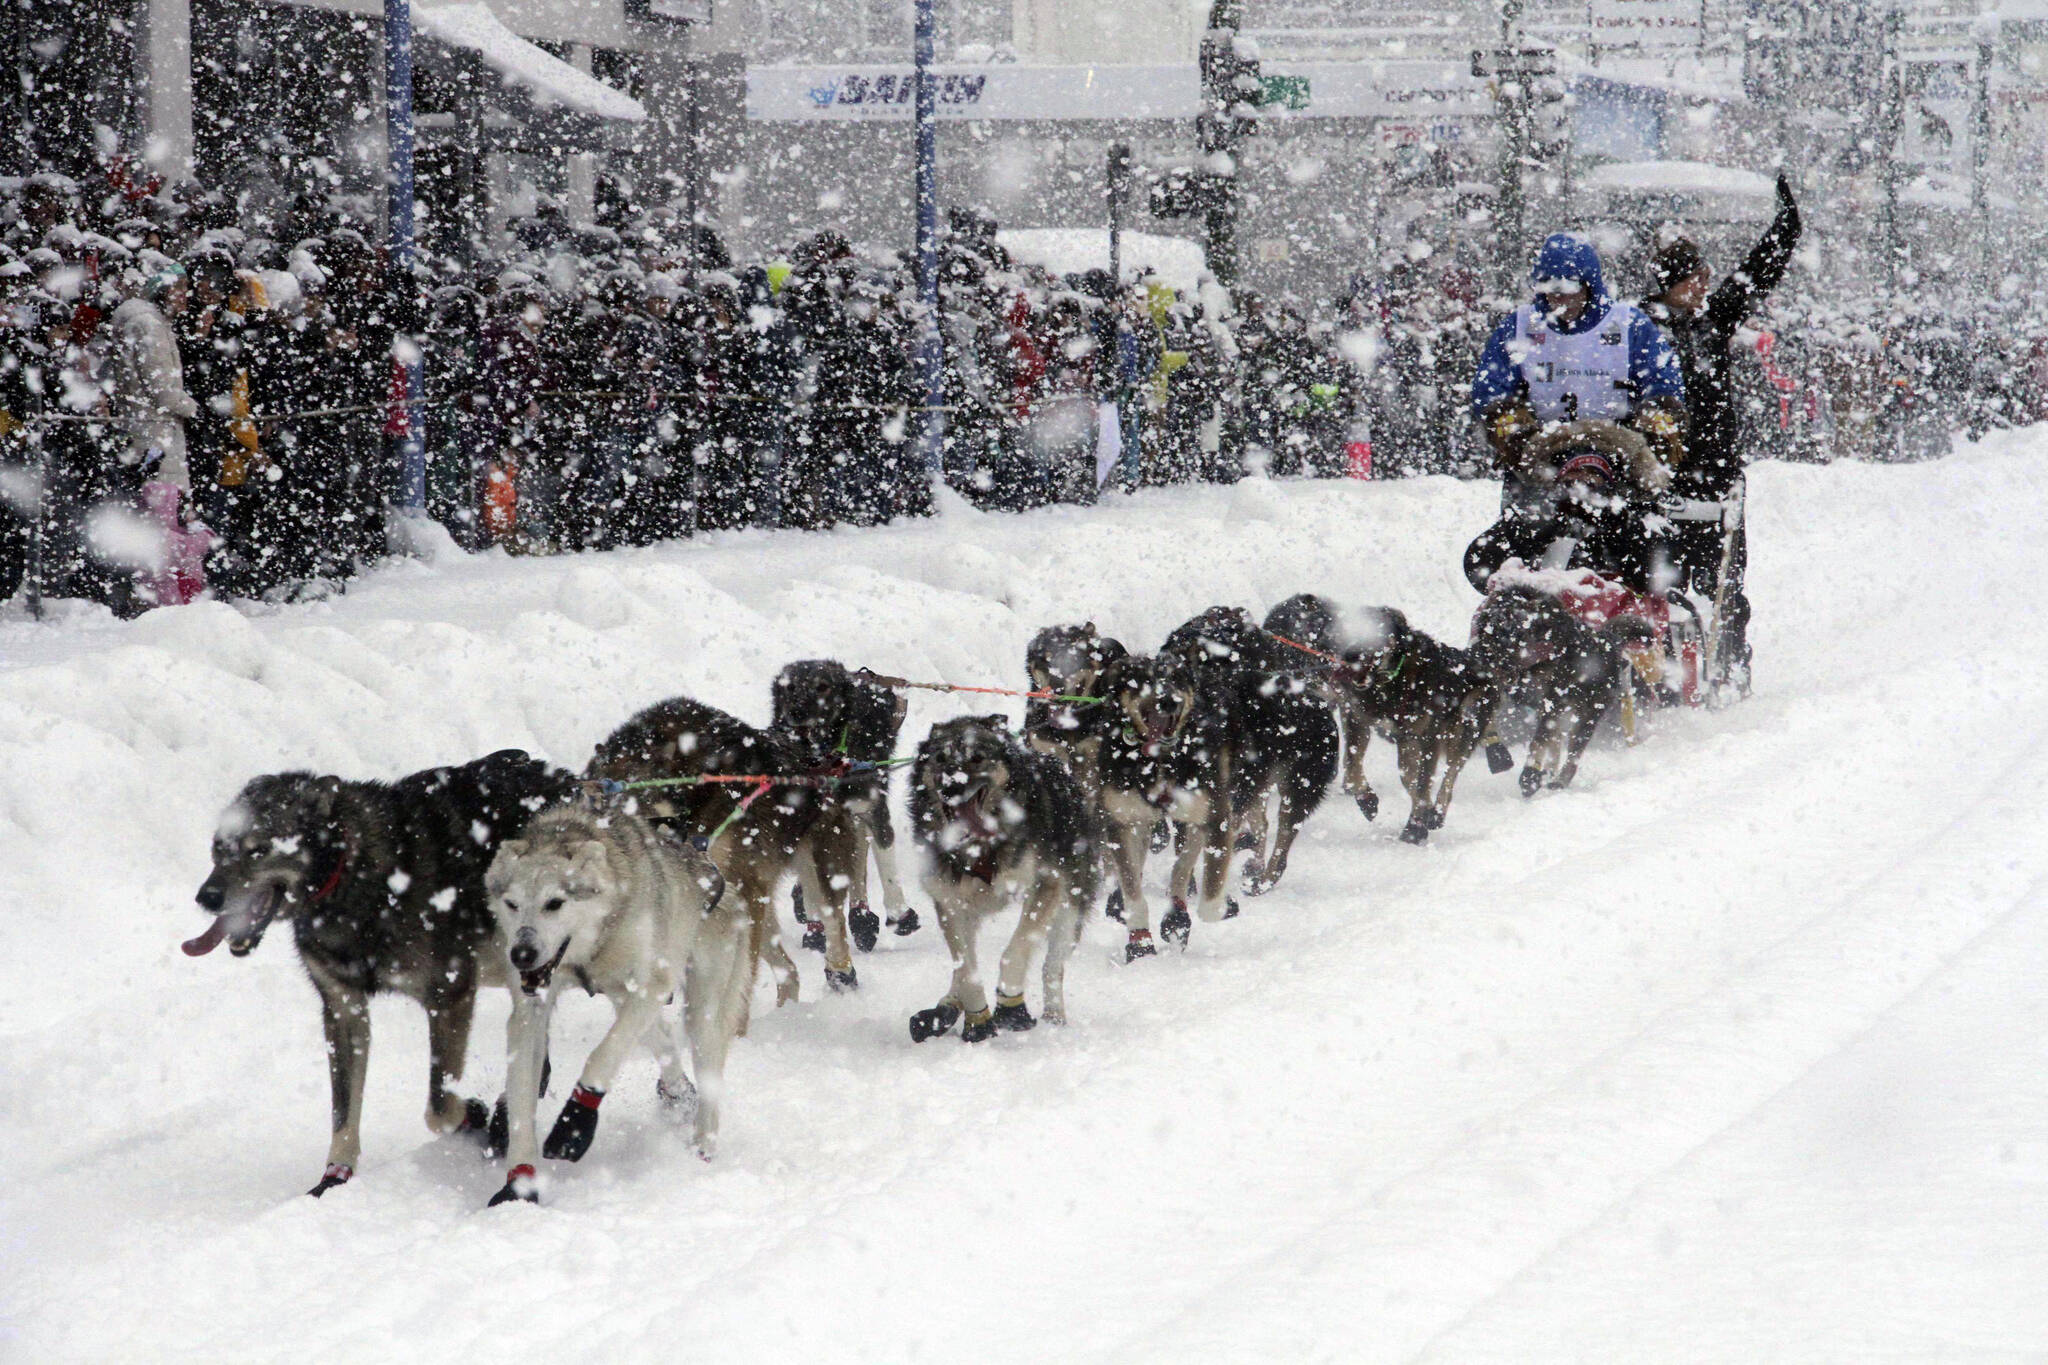 FILE - Jeff King takes his sled dog team through a snowstorm in downtown Anchorage, Alaska, March 4, 2022, during the ceremonial start of the Iditarod Trail Sled Dog Race. Only 33 mushers will participate in the ceremonial start of the Iditarod on Saturady, March 4, the smallest field ever. (AP Photo / Mark Thiessen)